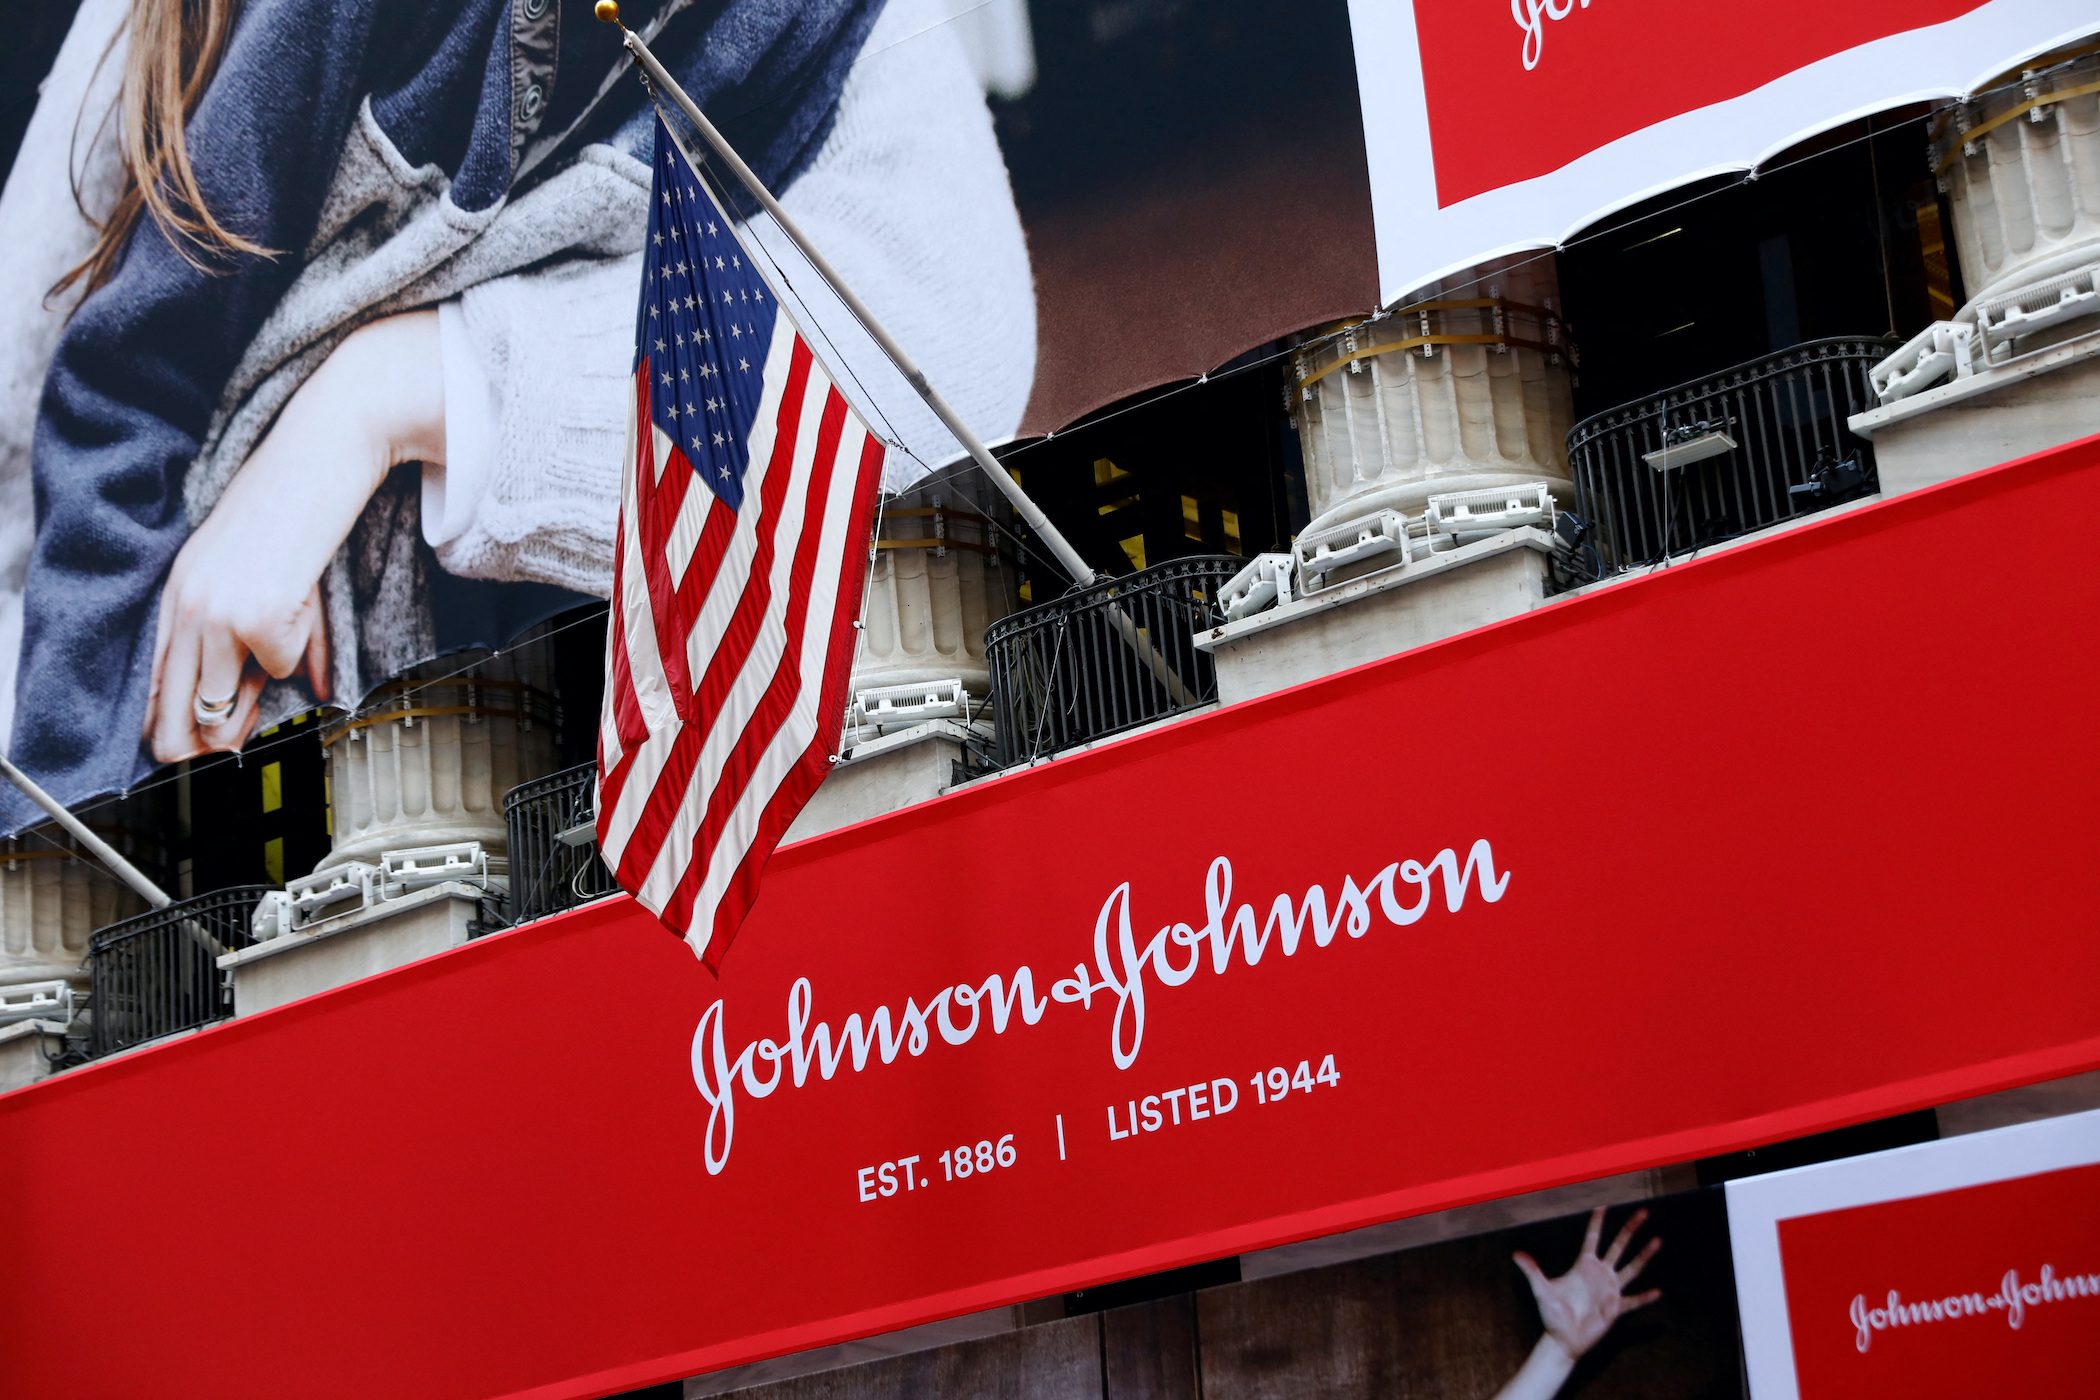 J&J to buy Abiomed for $16.6 billion ahead of consumer health spin-off